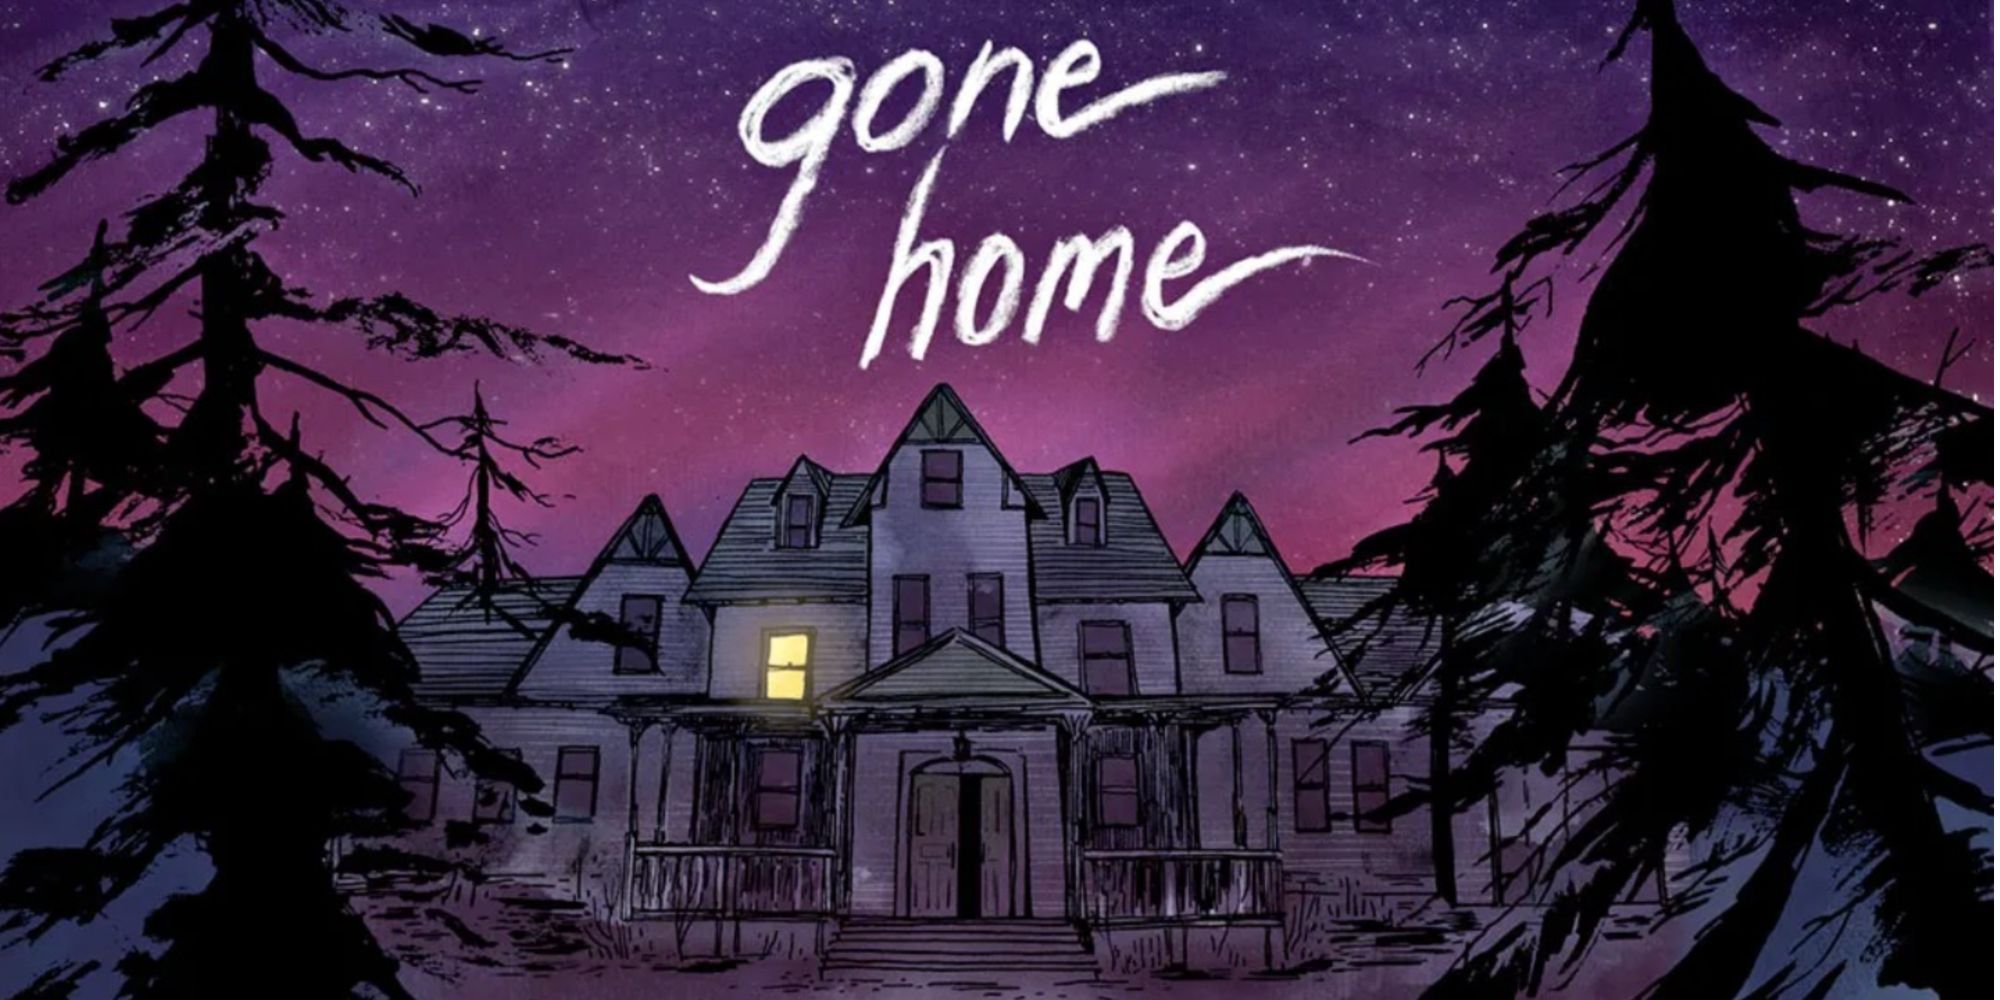 Promotional art for the game Gone Home